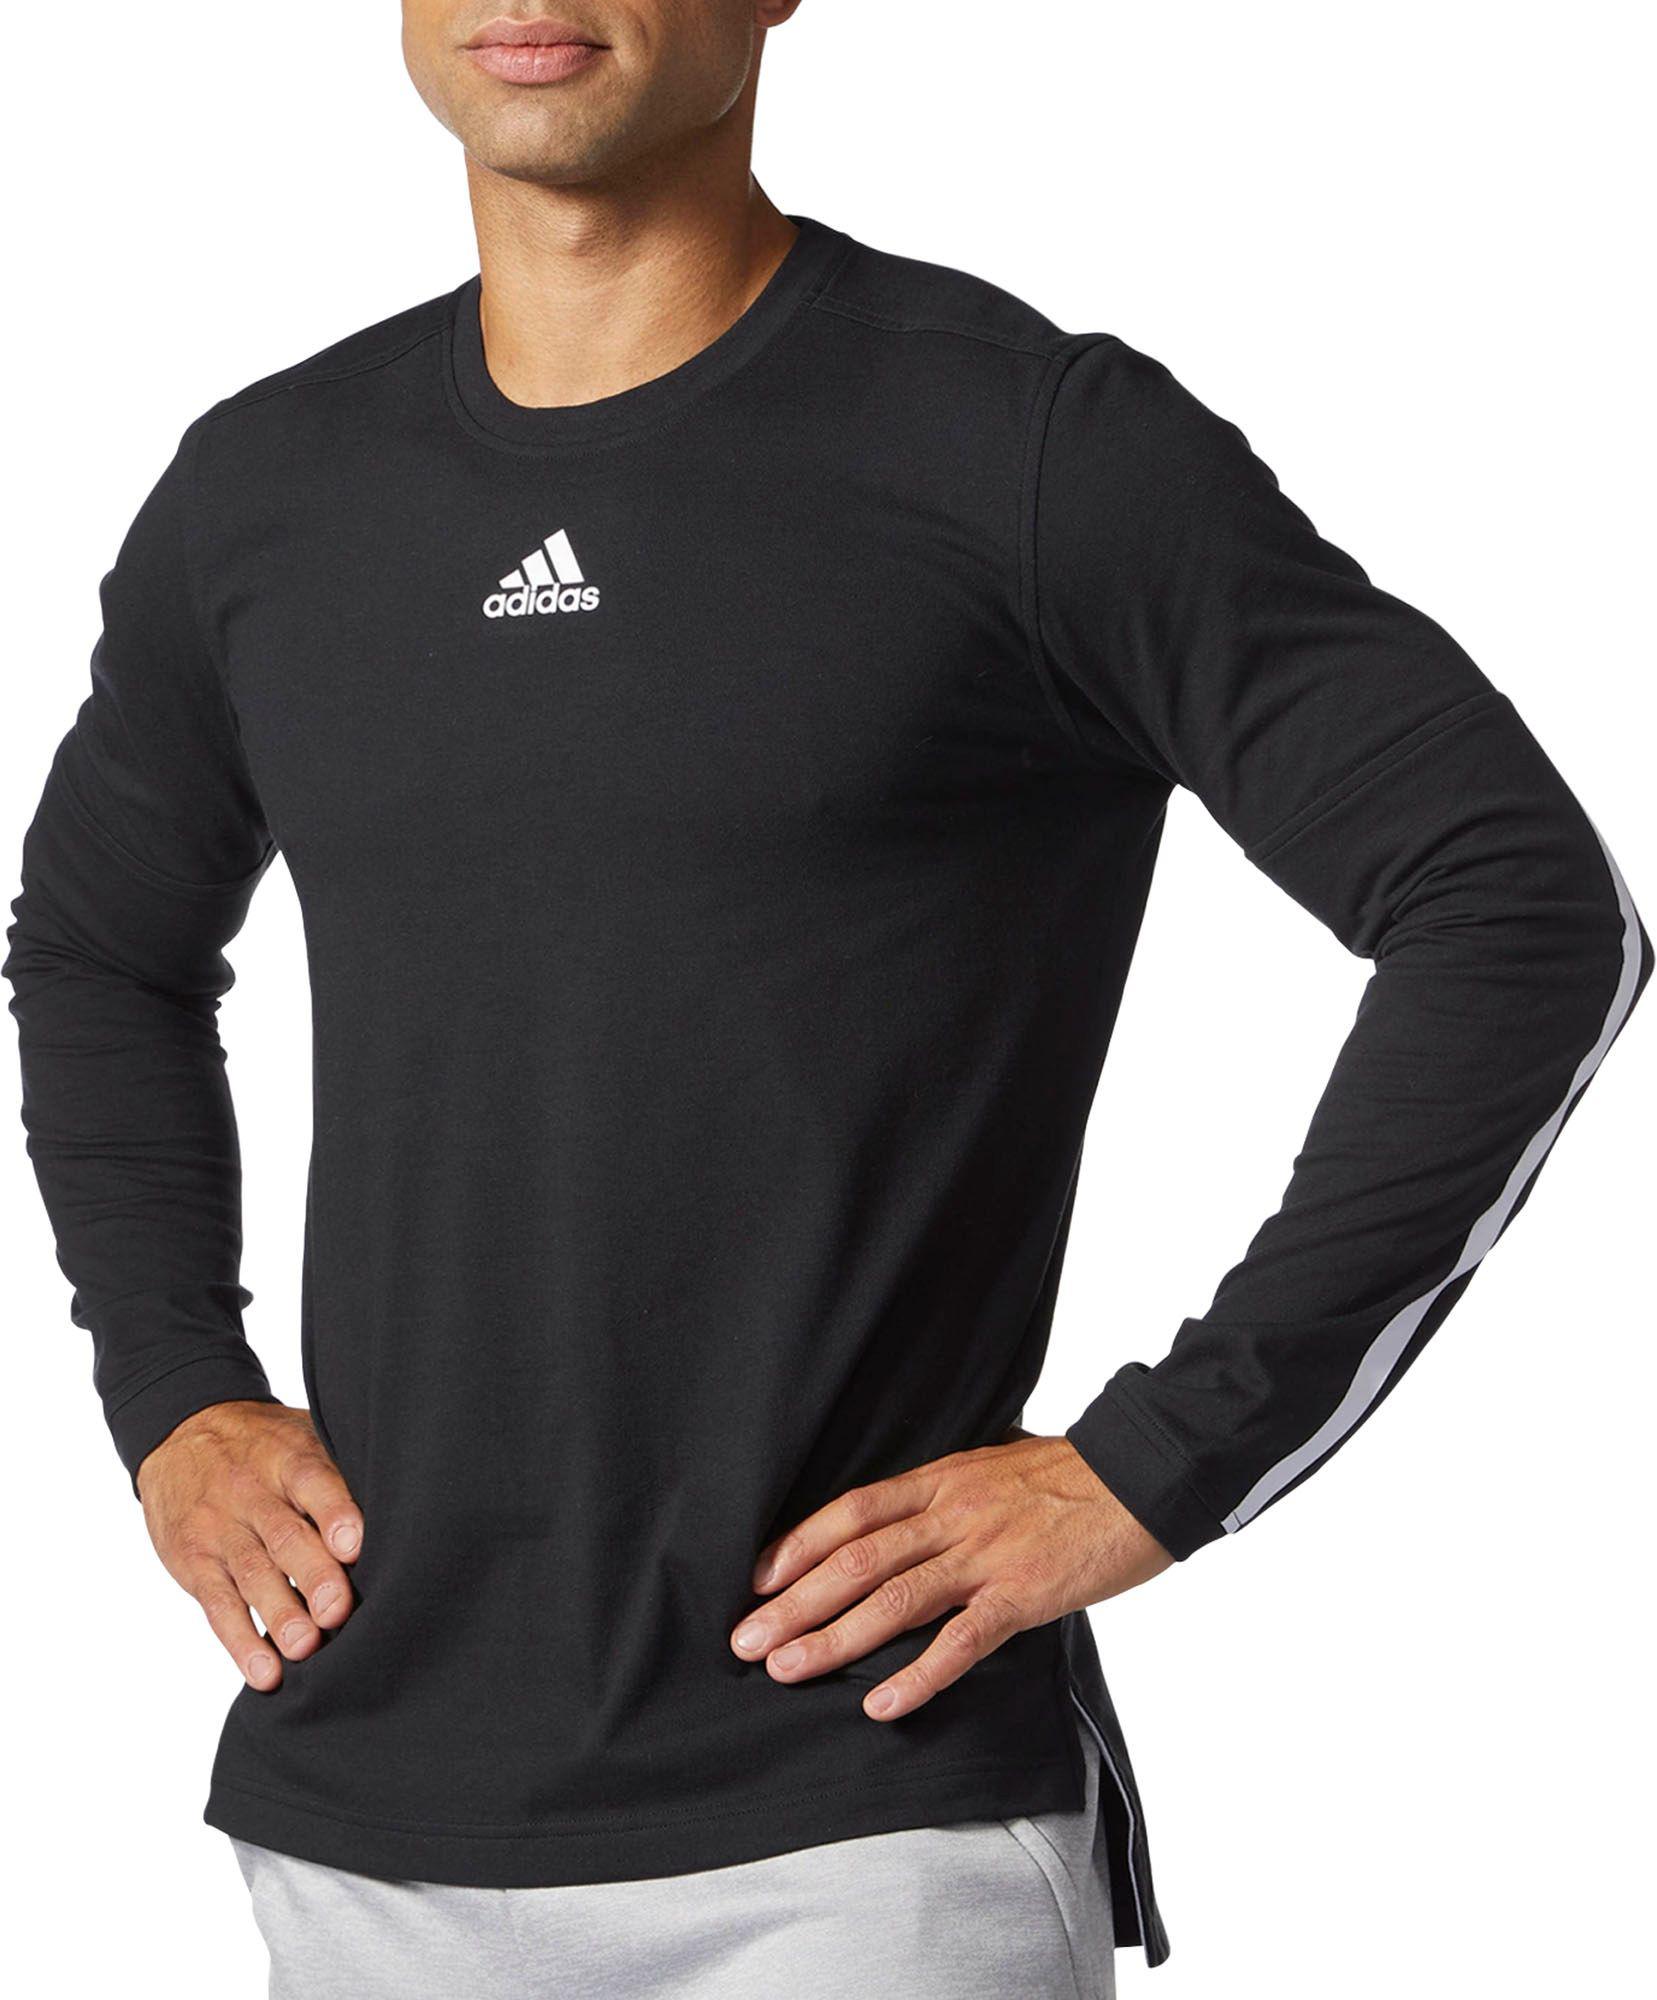 adidas Striped Long Sleeve Shirt in Black for Men - Lyst